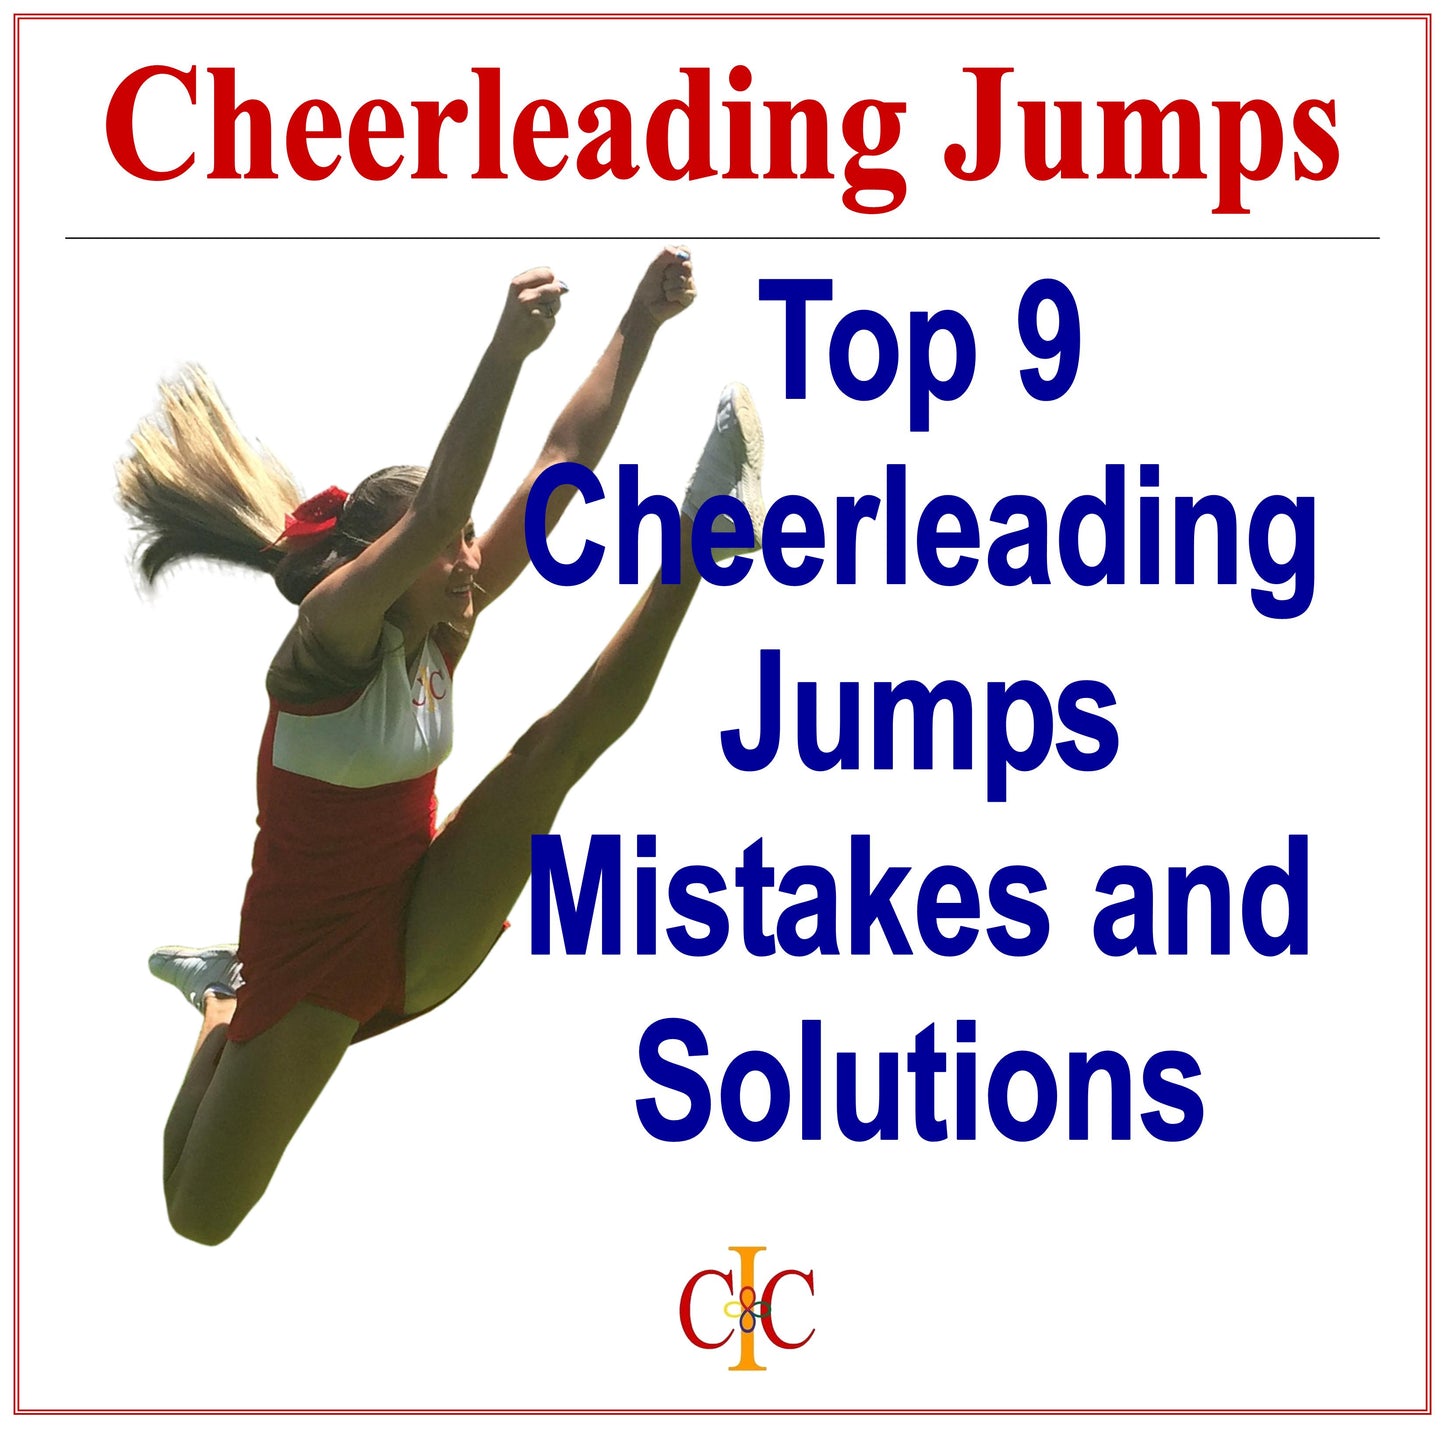 The Top Cheerleading Jump Mistakes and Solutions